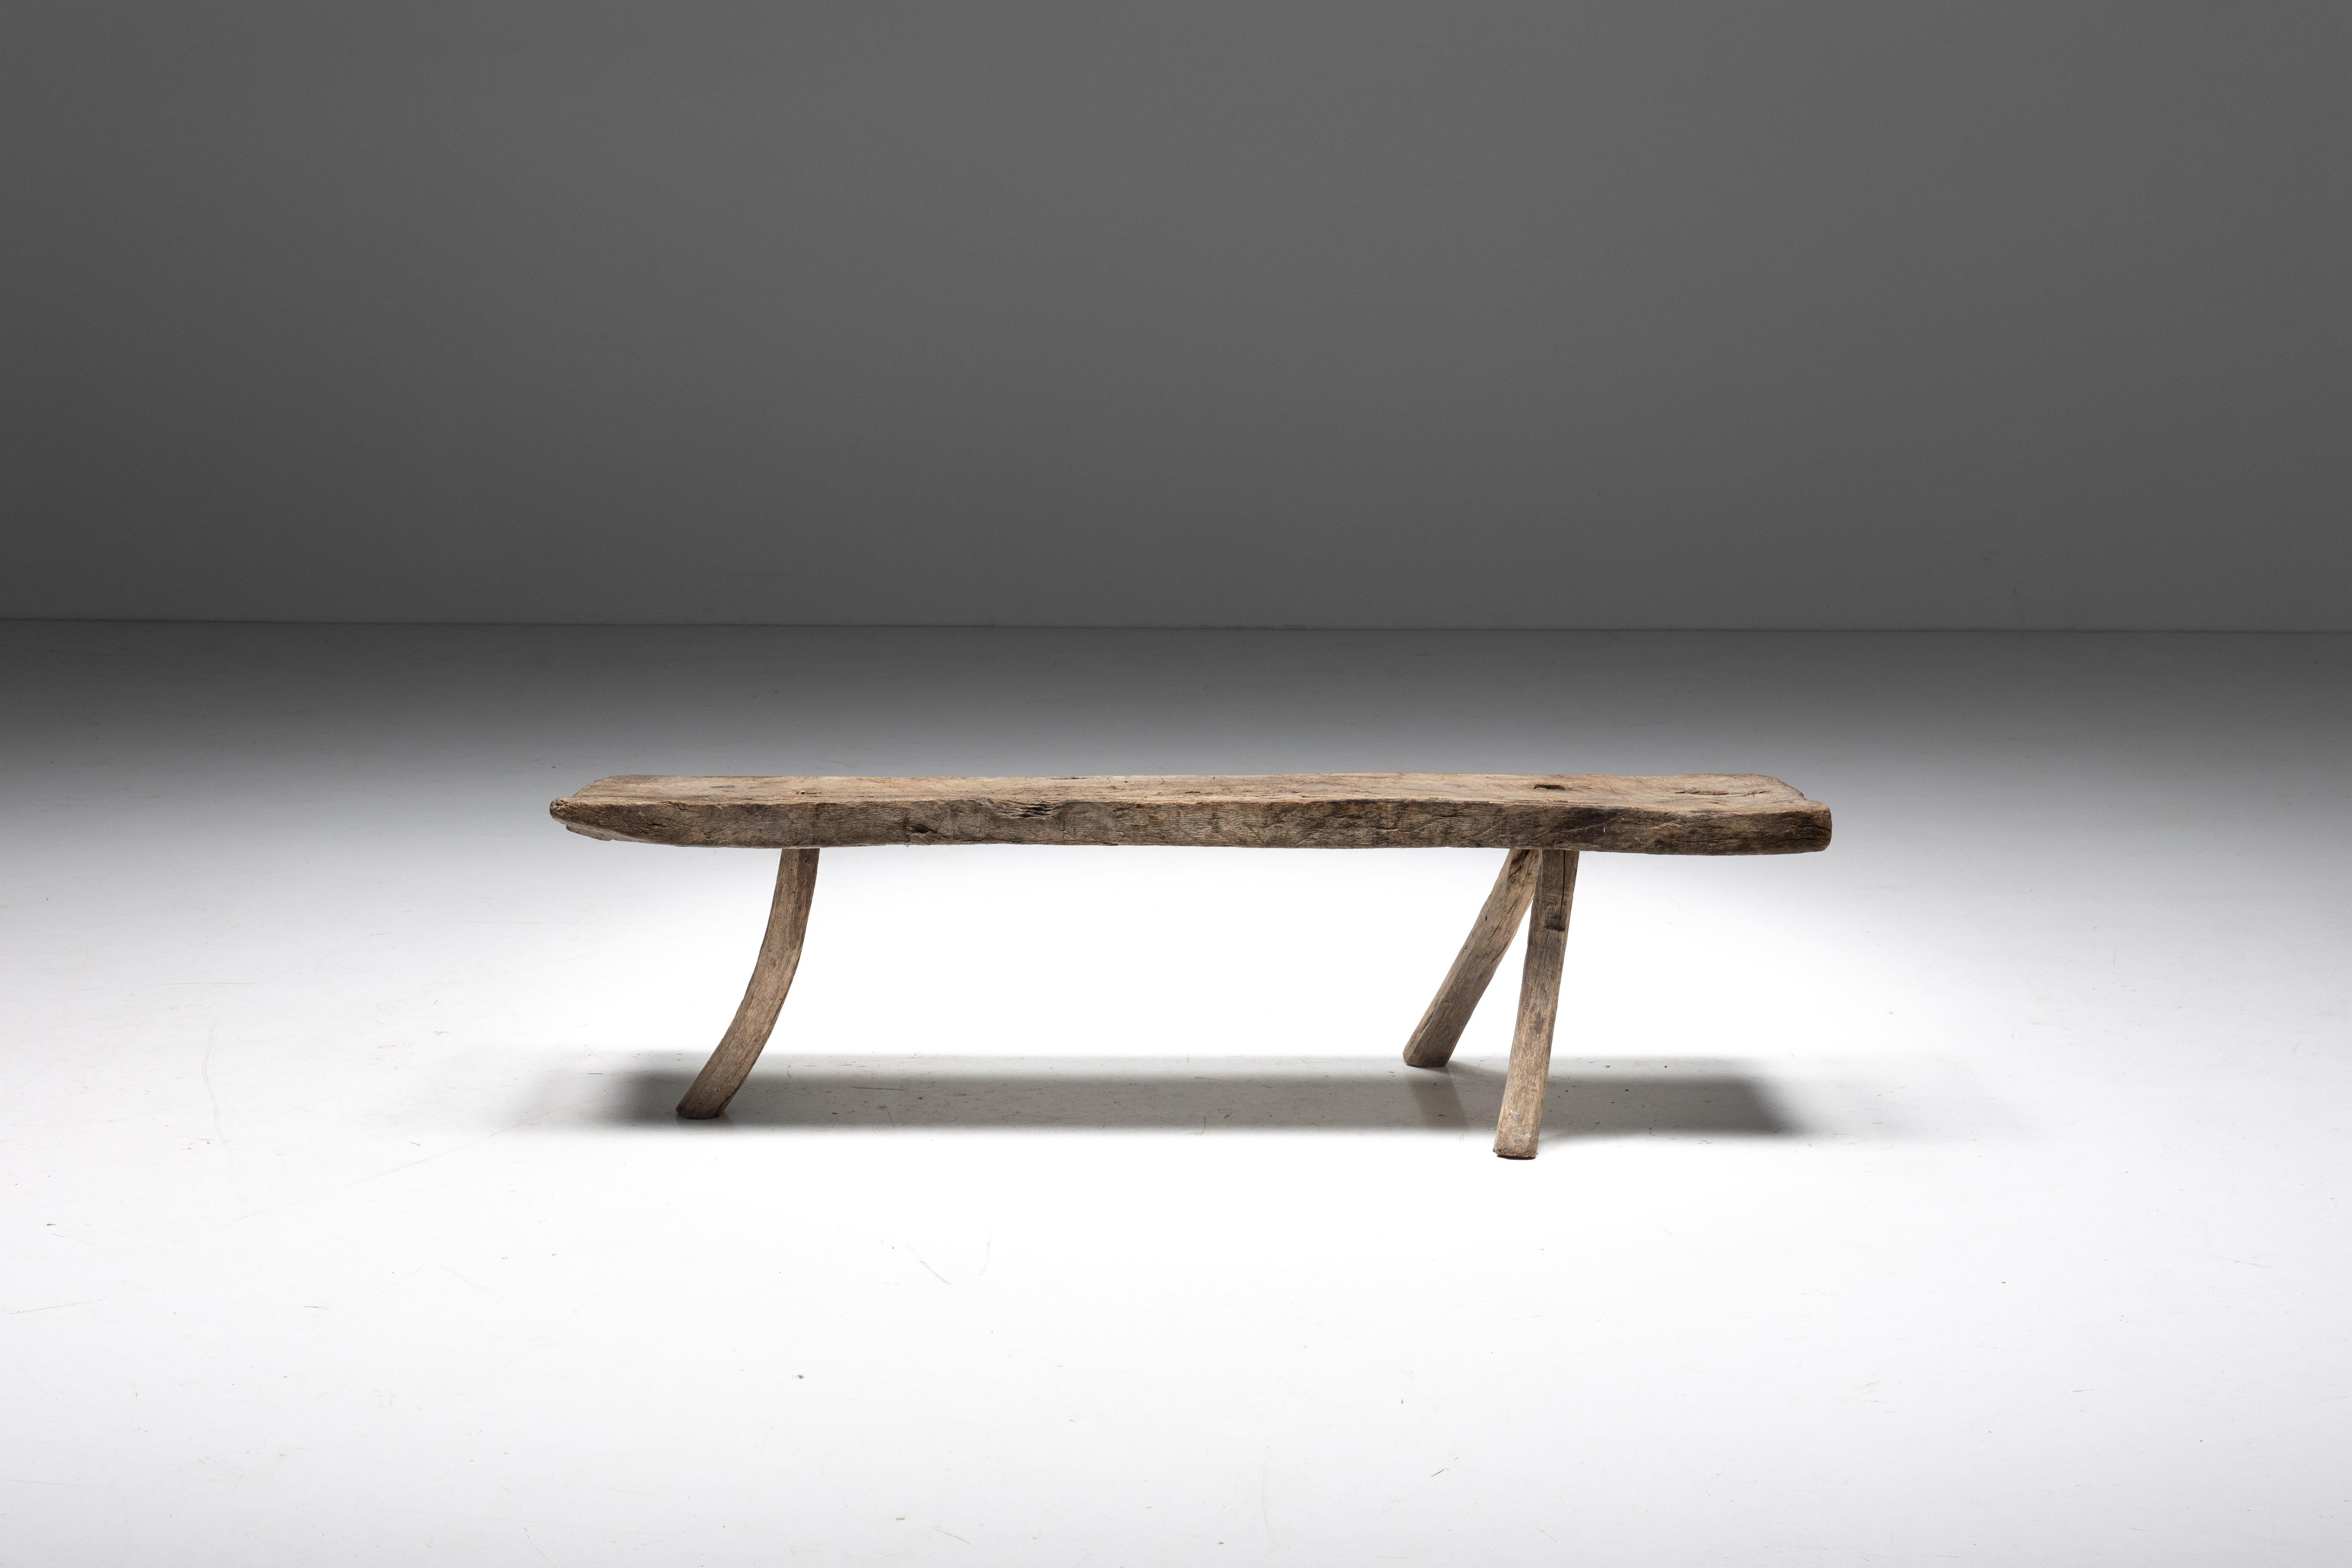 Monoxylite; Wabi Sabi; Folk Art; Travail Populaire; Tripod Bench; Art Populaire; Rustic; 19th Century; France;

19th century tripod bench, seamlessly integrating wabi-sabi design elements. Crafted with care, this rustic bench reflects the